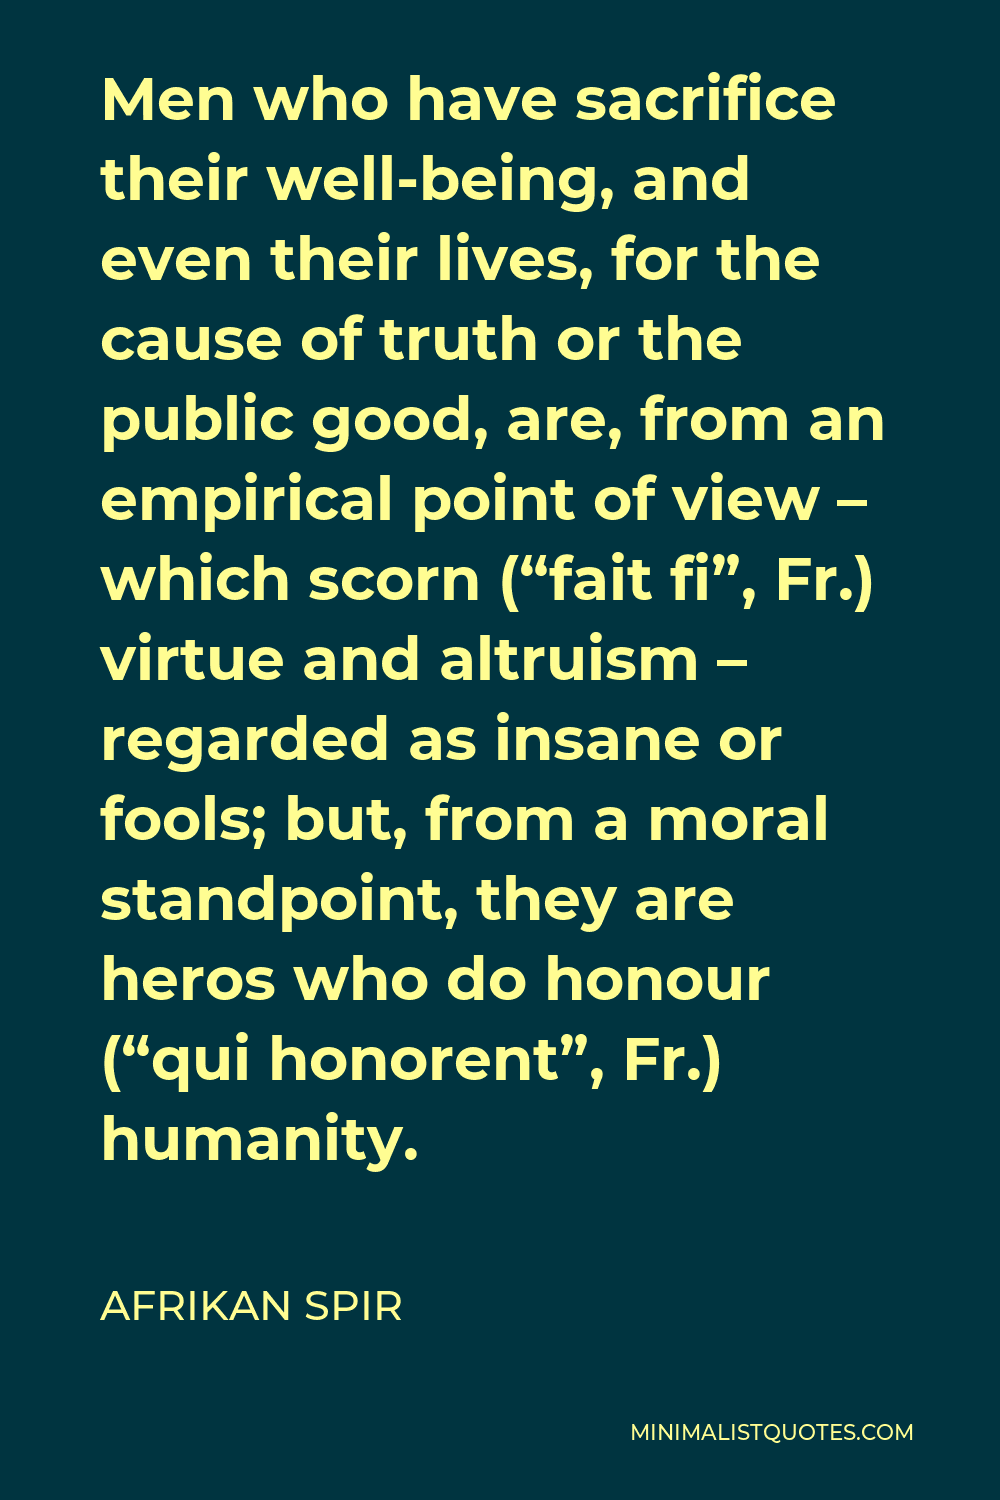 Afrikan Spir Quote - Men who have sacrifice their well-being, and even their lives, for the cause of truth or the public good, are, from an empirical point of view – which scorn (“fait fi”, Fr.) virtue and altruism – regarded as insane or fools; but, from a moral standpoint, they are heros who do honour (“qui honorent”, Fr.) humanity.